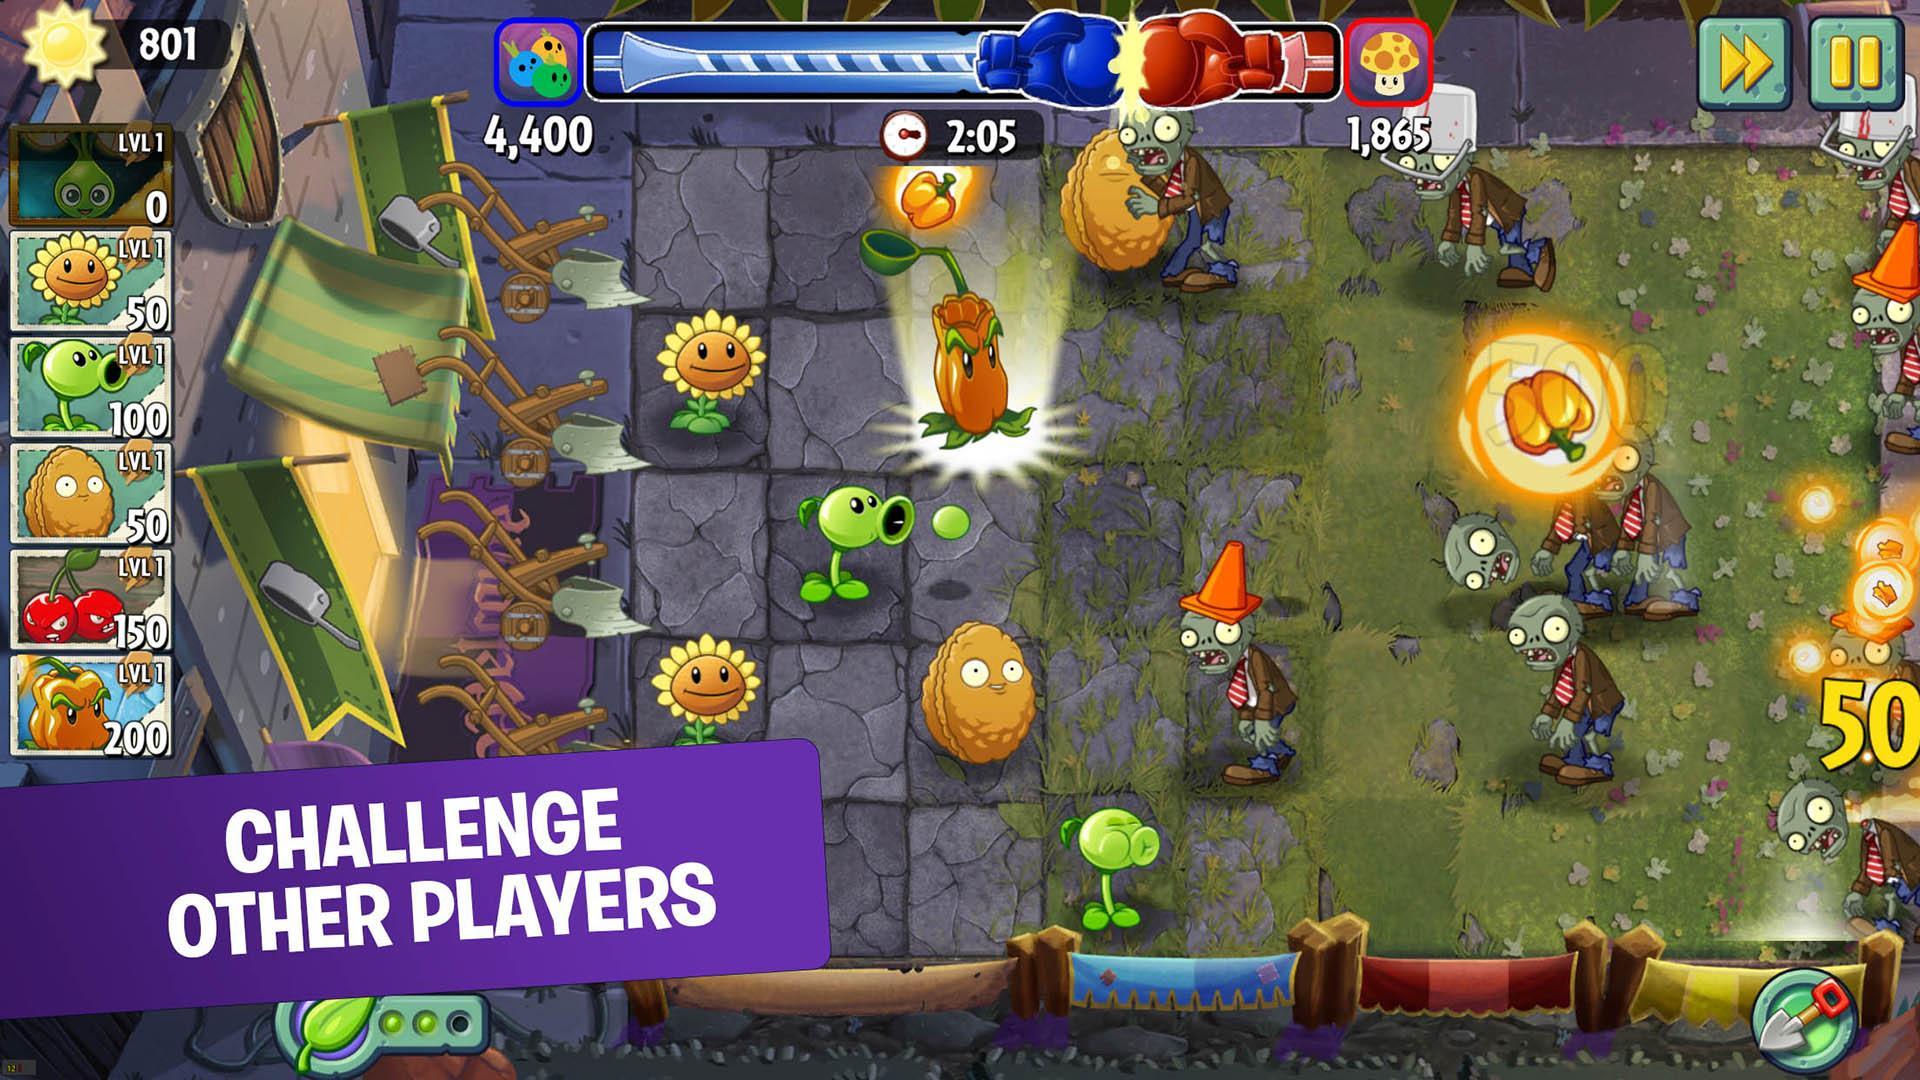 Plants Vs Zombies 2 Apk Download Free Tower Defense Game For Android Apkpure Com - plants vs zombies wave zombie roblox